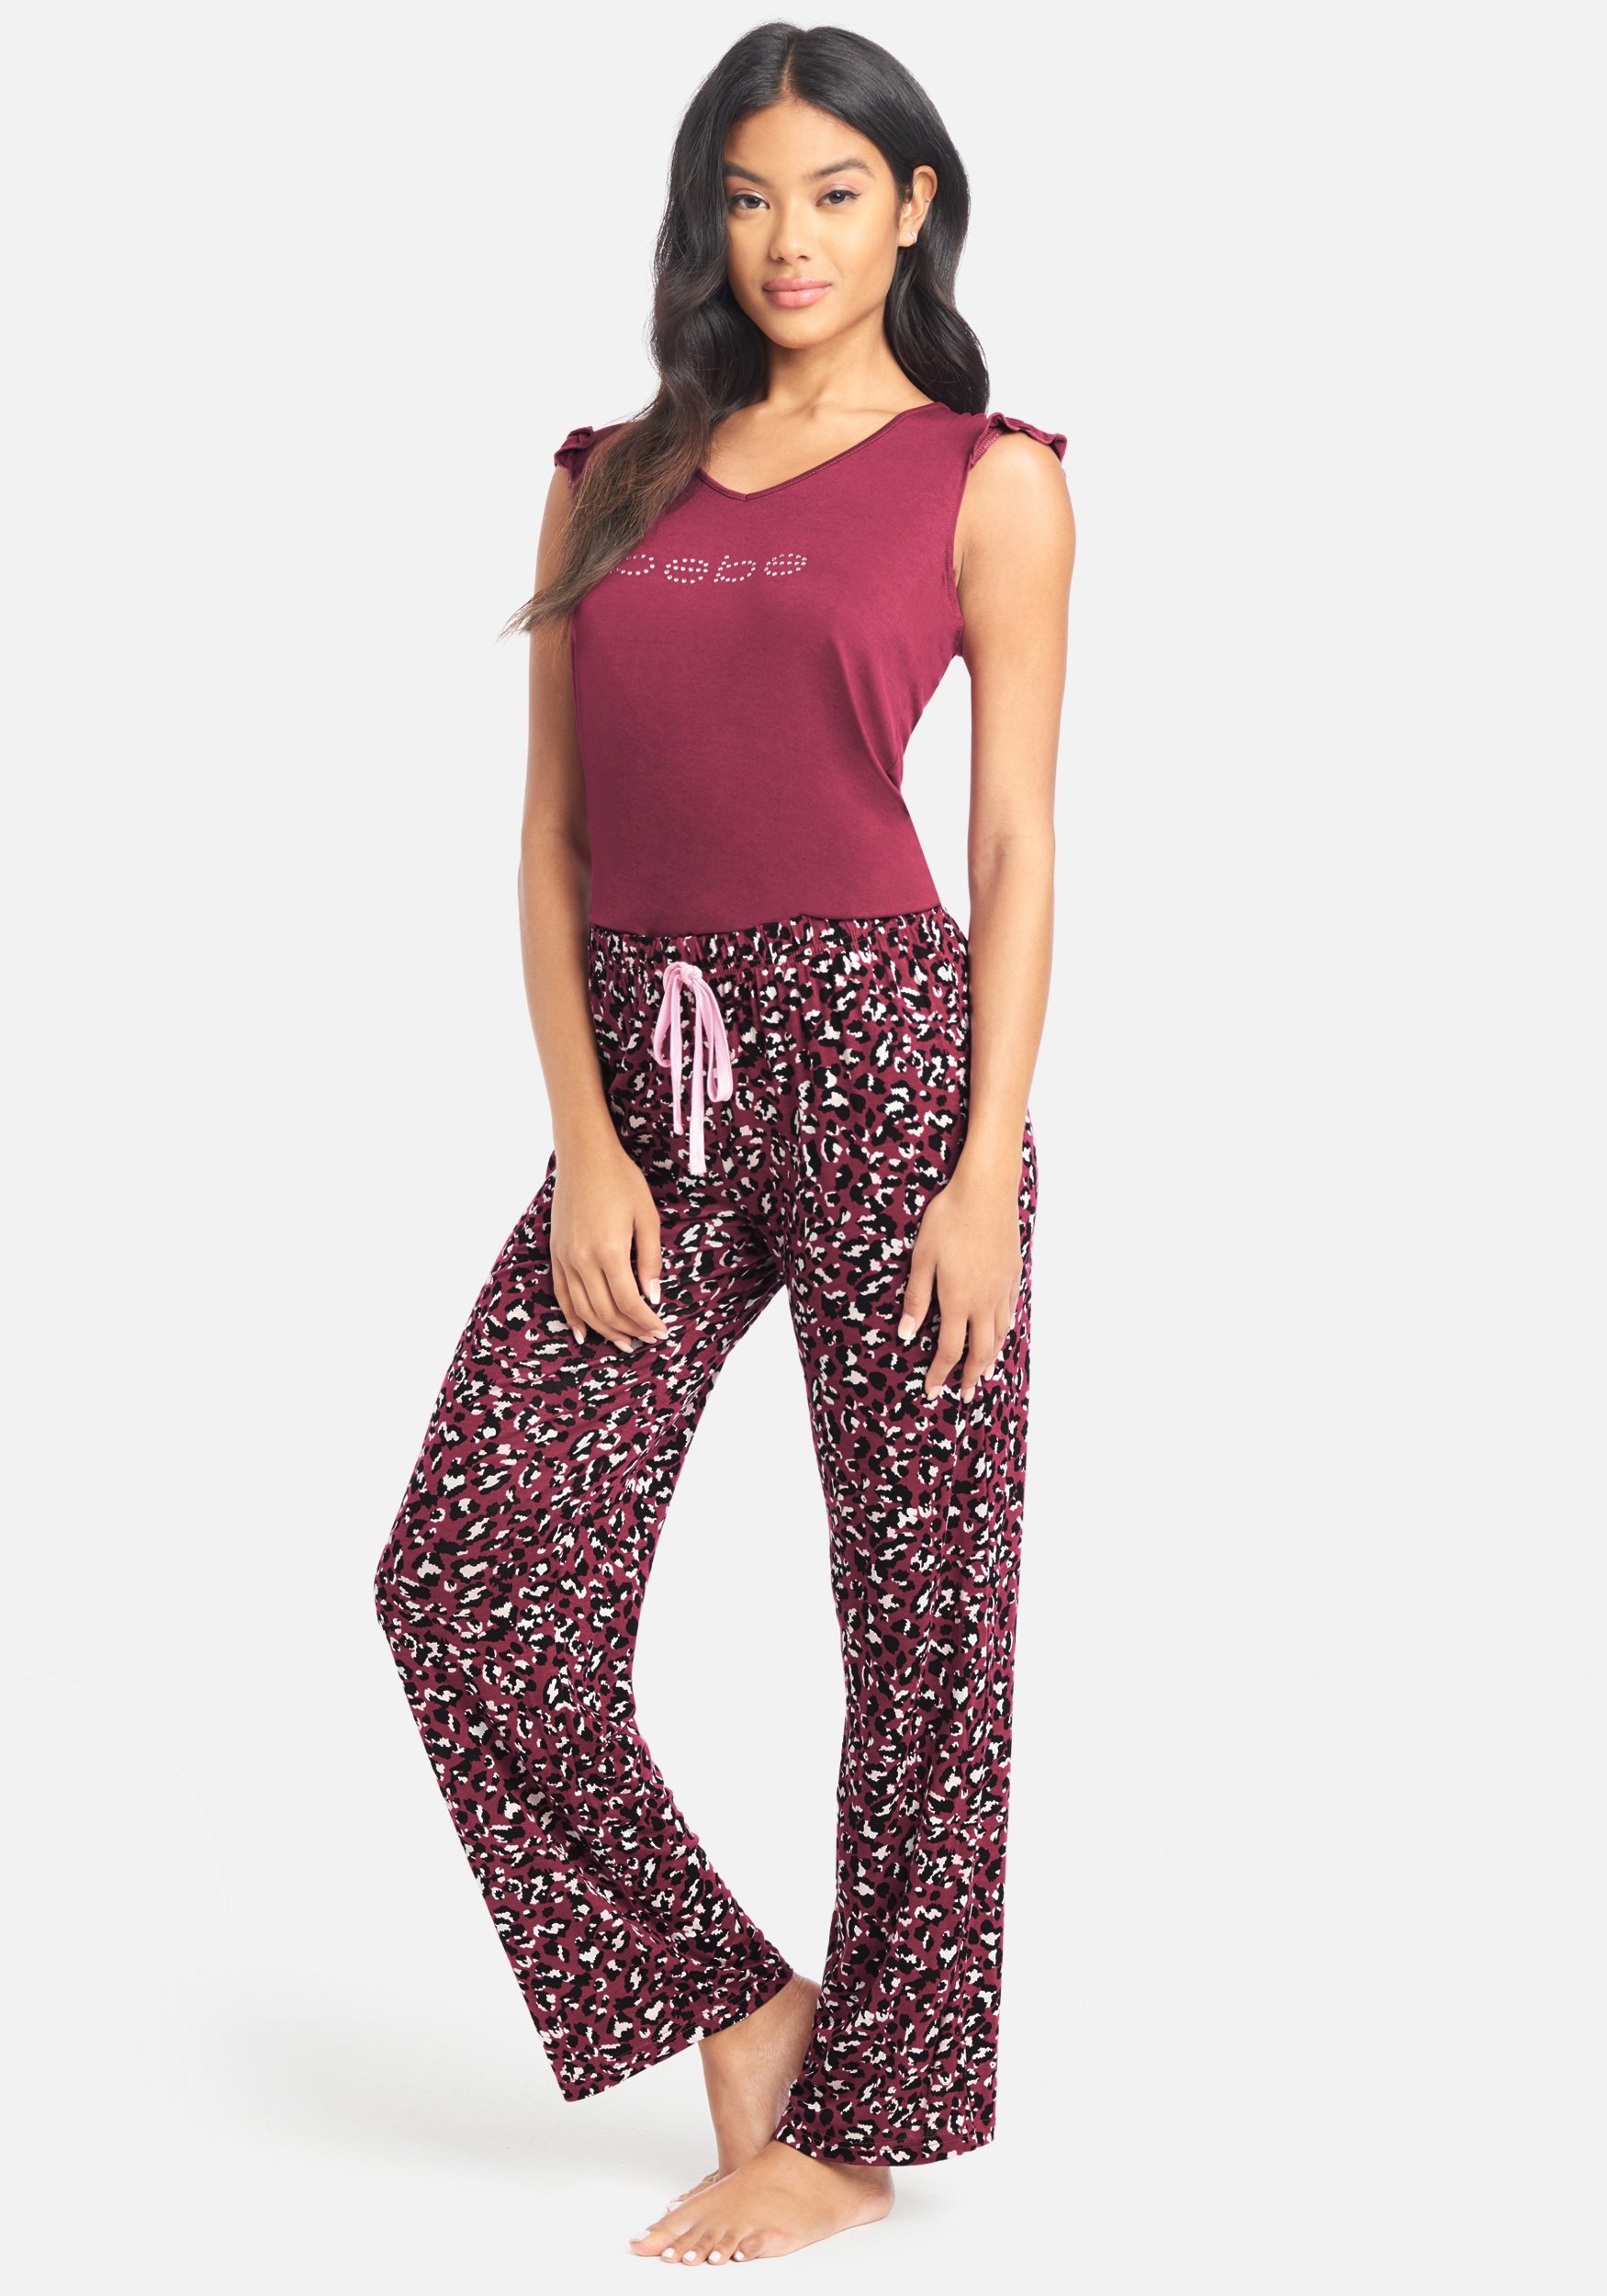 Women's Bebe Printed Pant Set, Size Small in Plum Spandex